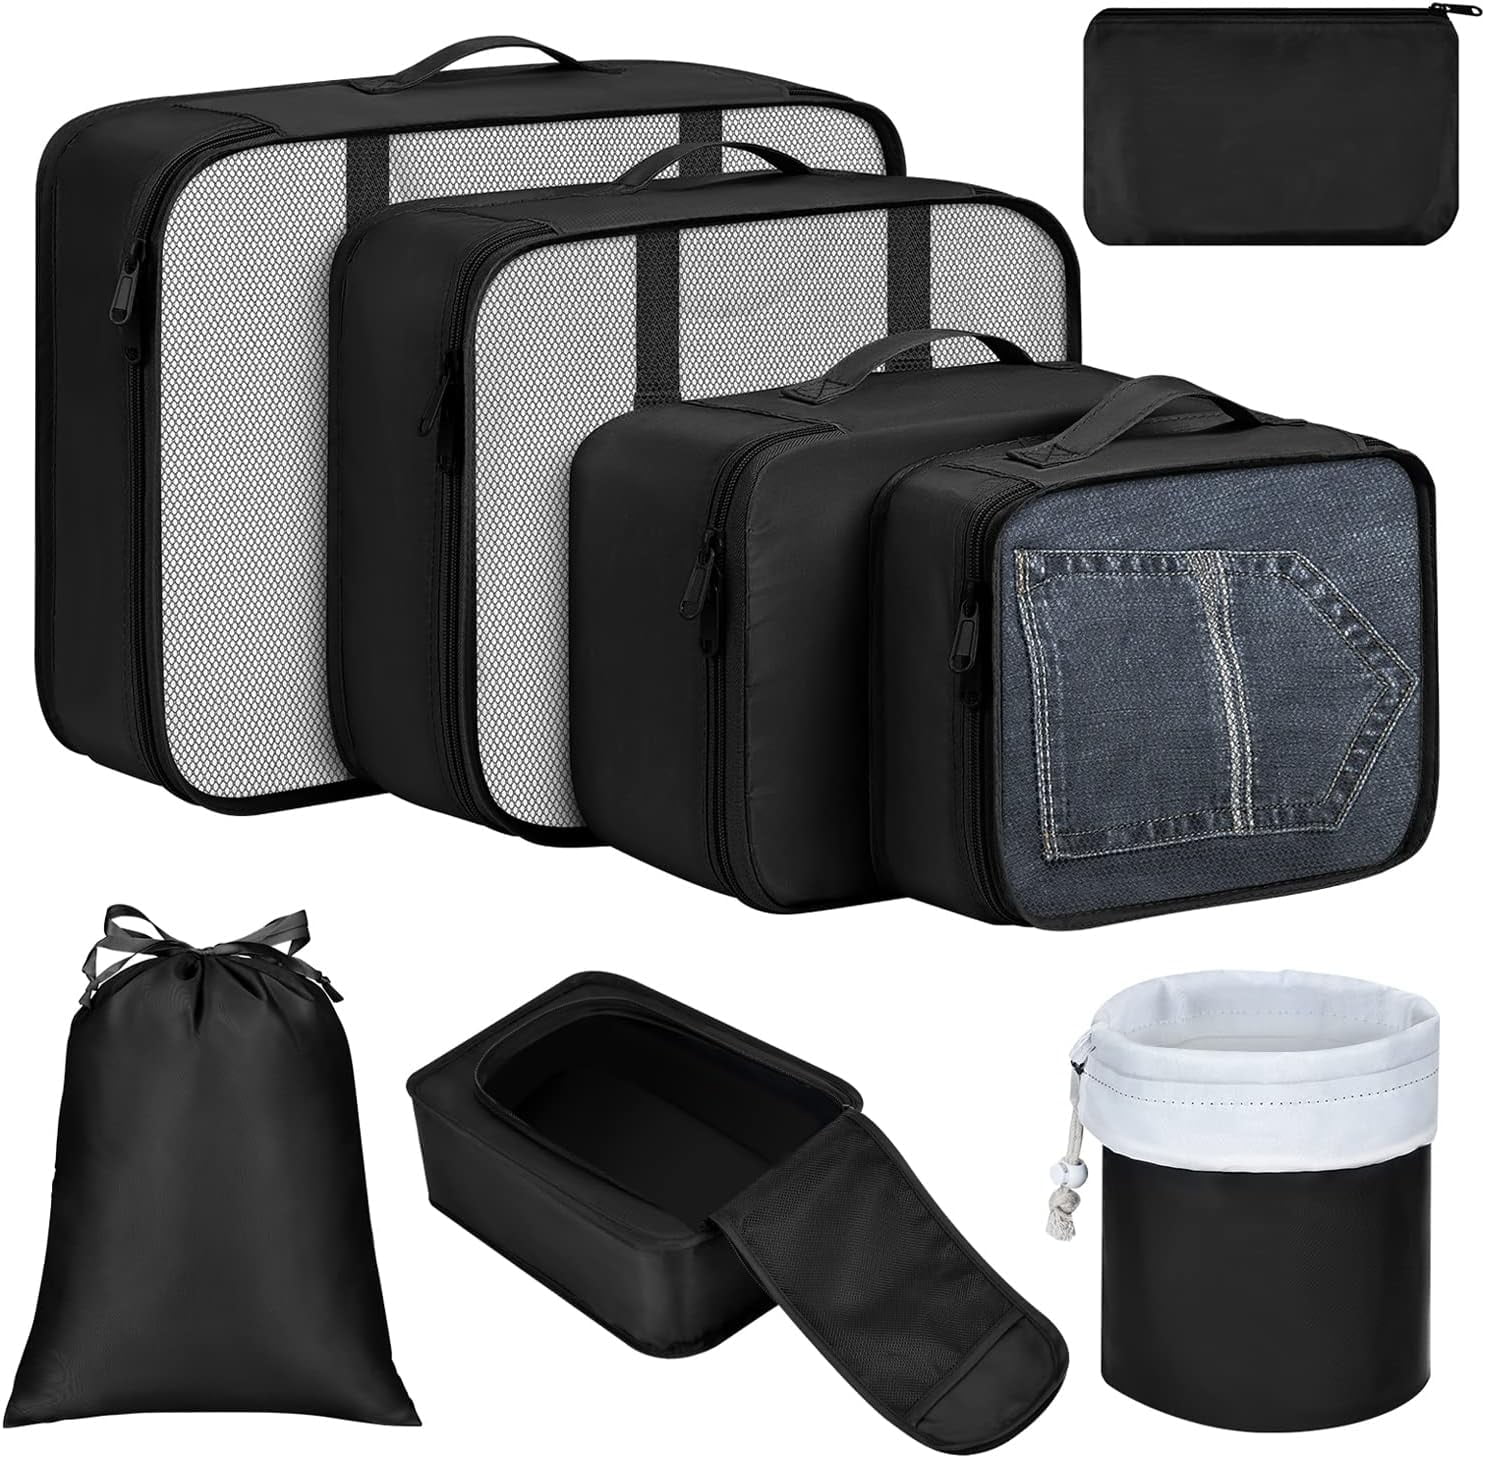 Travel Bag Organizers, Toiletry & Accessory Bags - IKEA